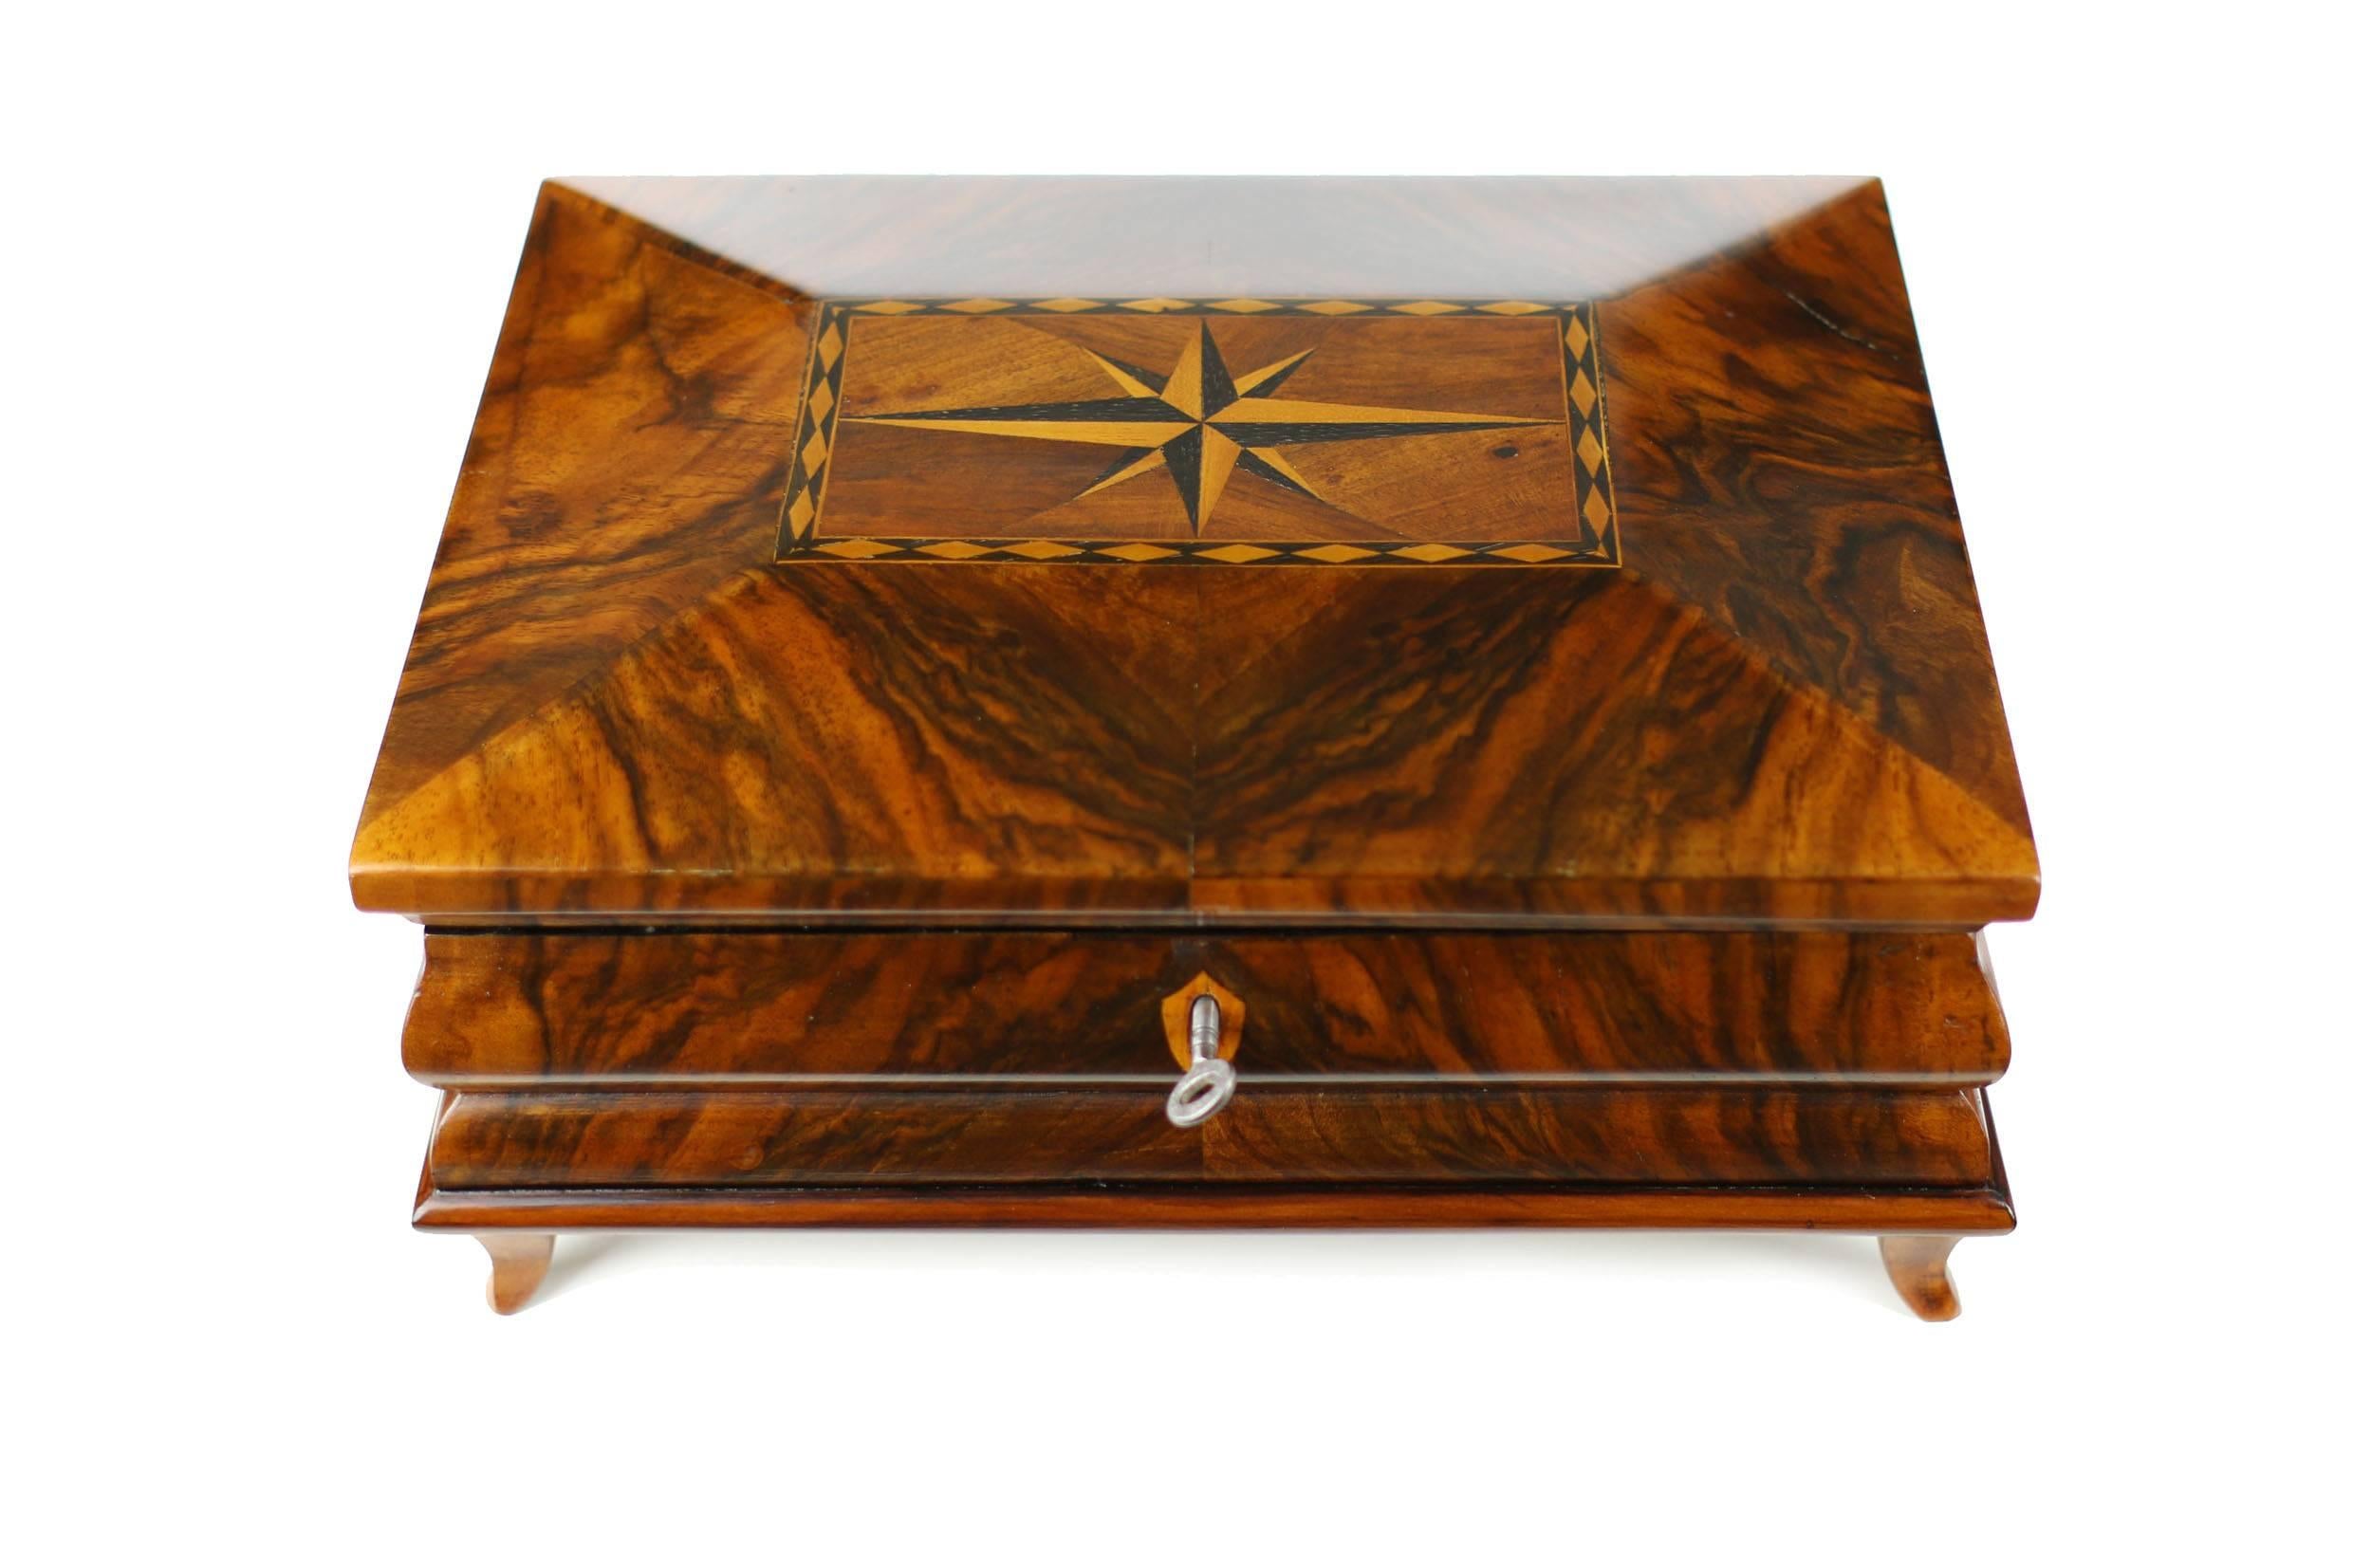 Walnut, circa 1800.
Star inlaid work on the lid.
Inside a mirror and nice subdivision at two levels.
Restored state.
Shellac polish.
Measures: Height 14 cm, width 27.5 cm, depth 20 cm.

I dispatch by air in safe wood boxes only. So no need to